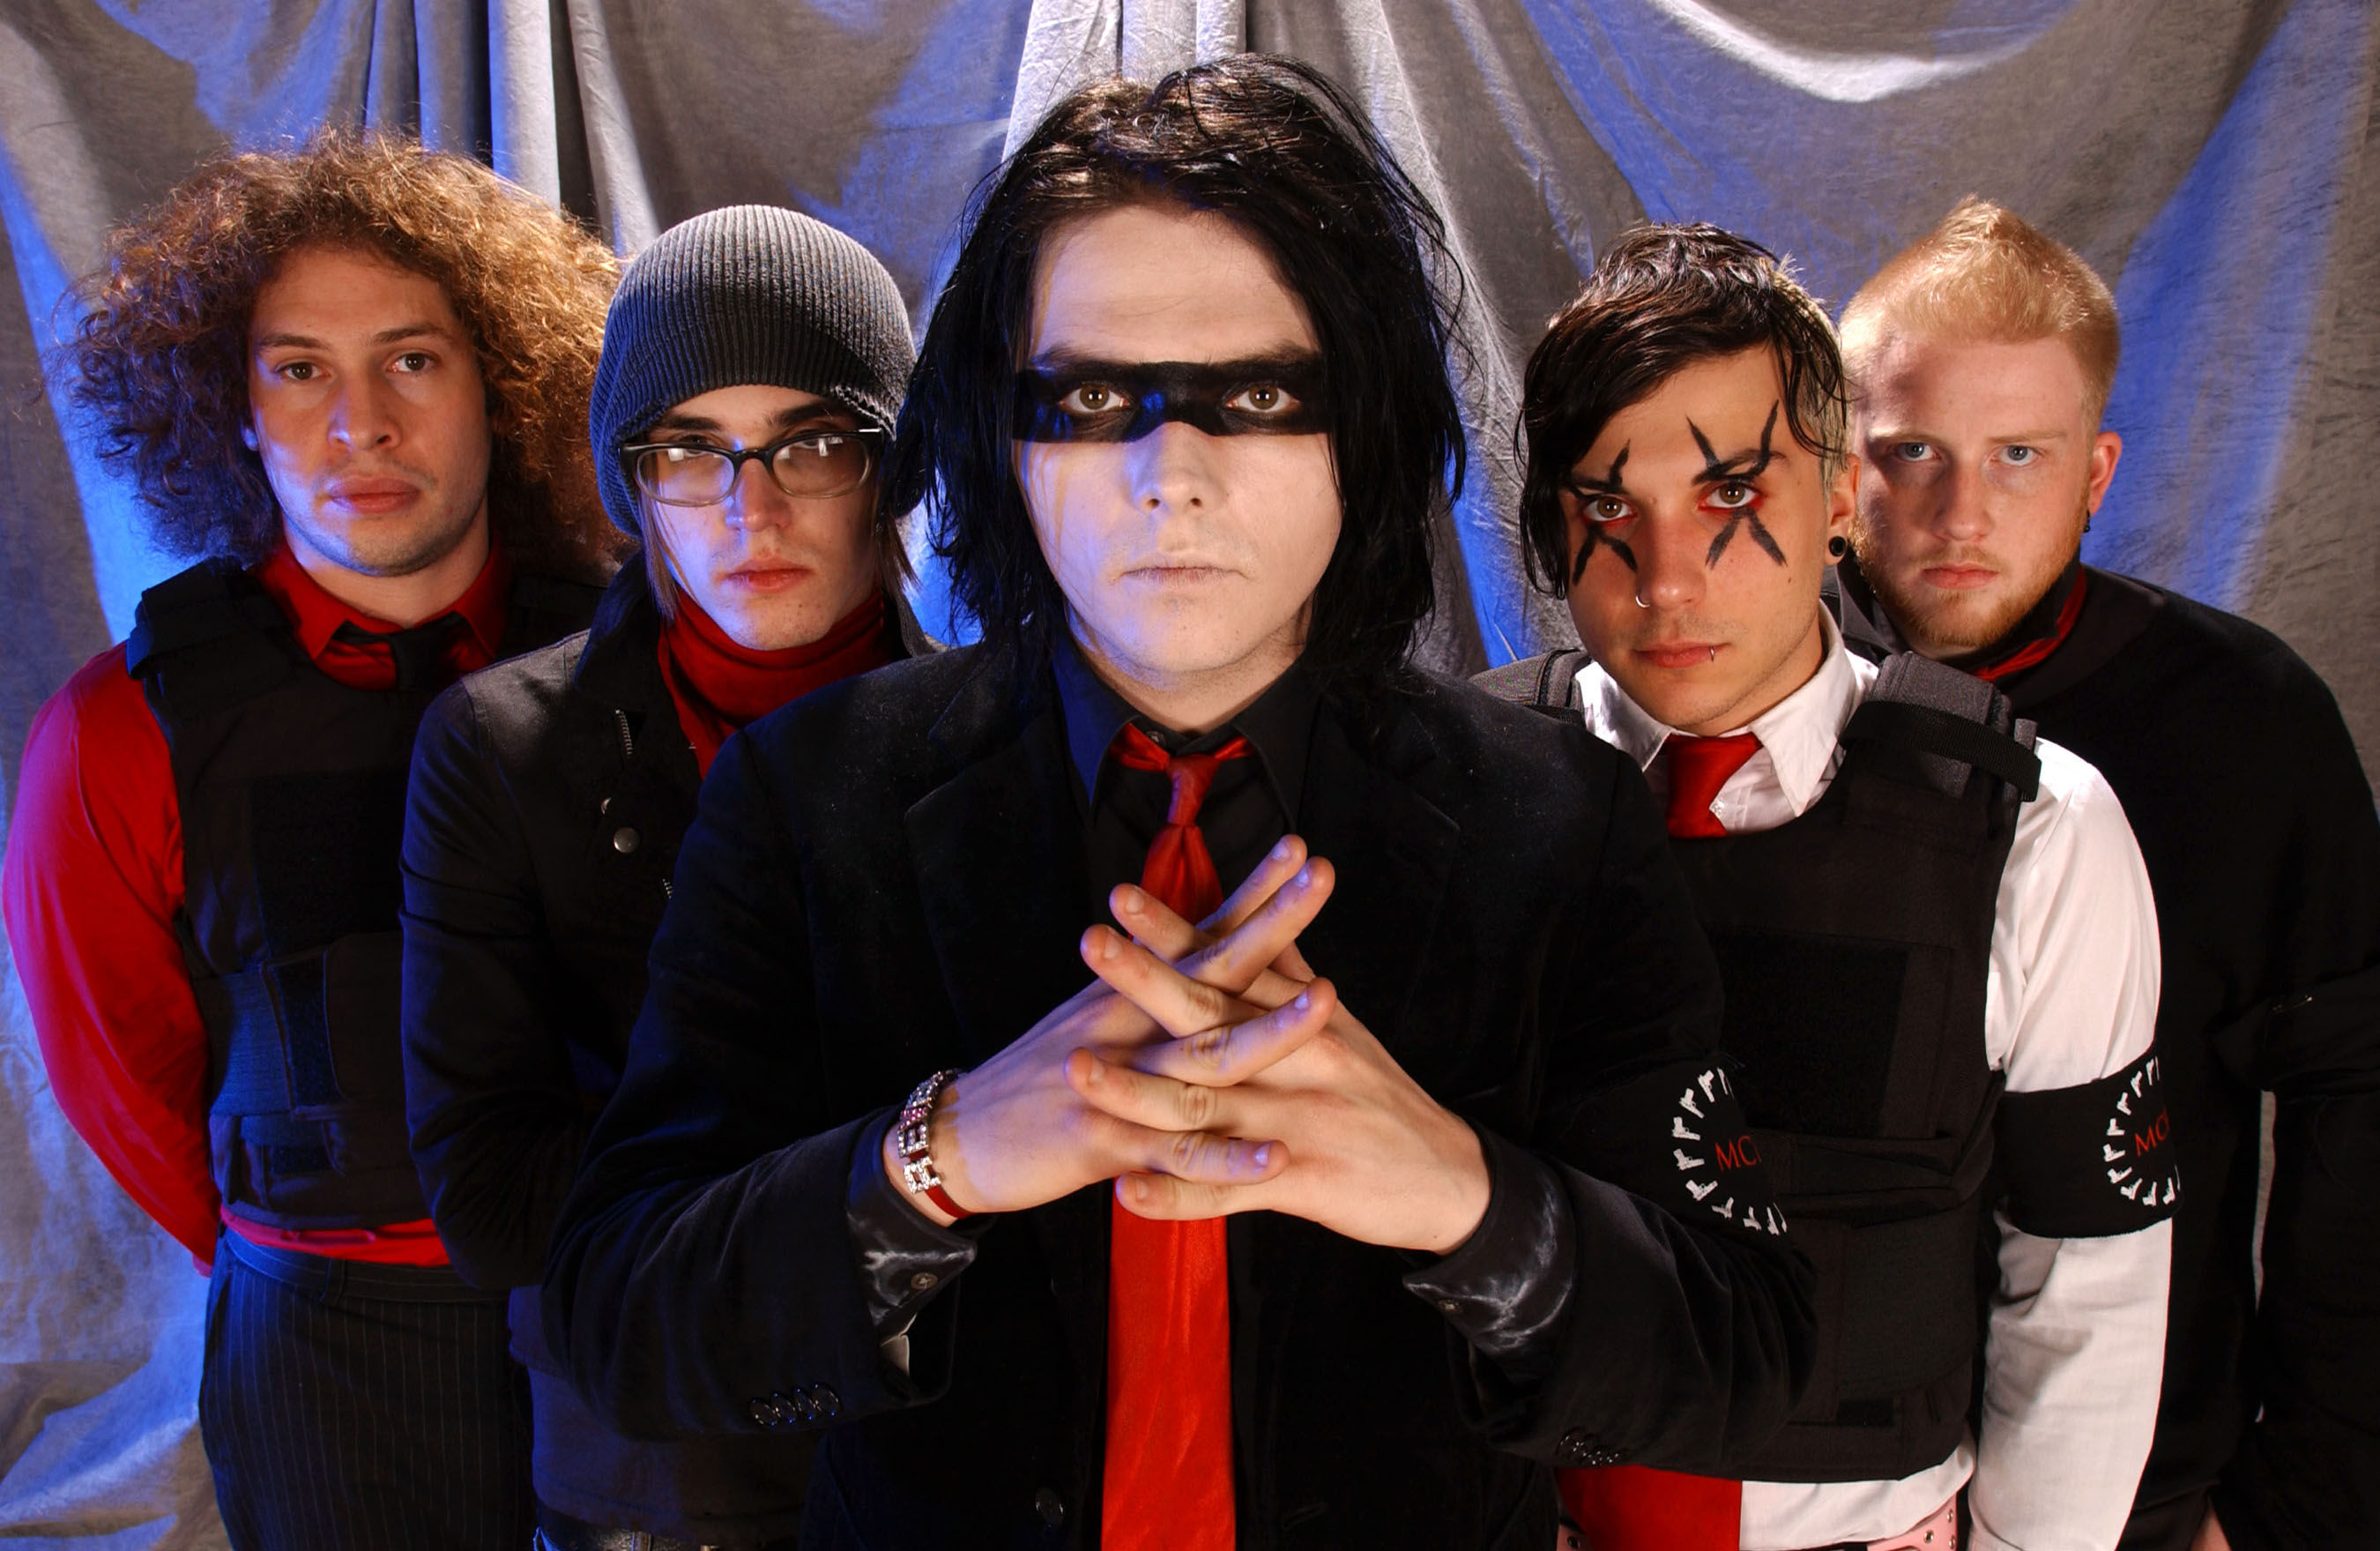 2700x1759 Vinyl of the Week: The Black Parade by My Chemical Romance